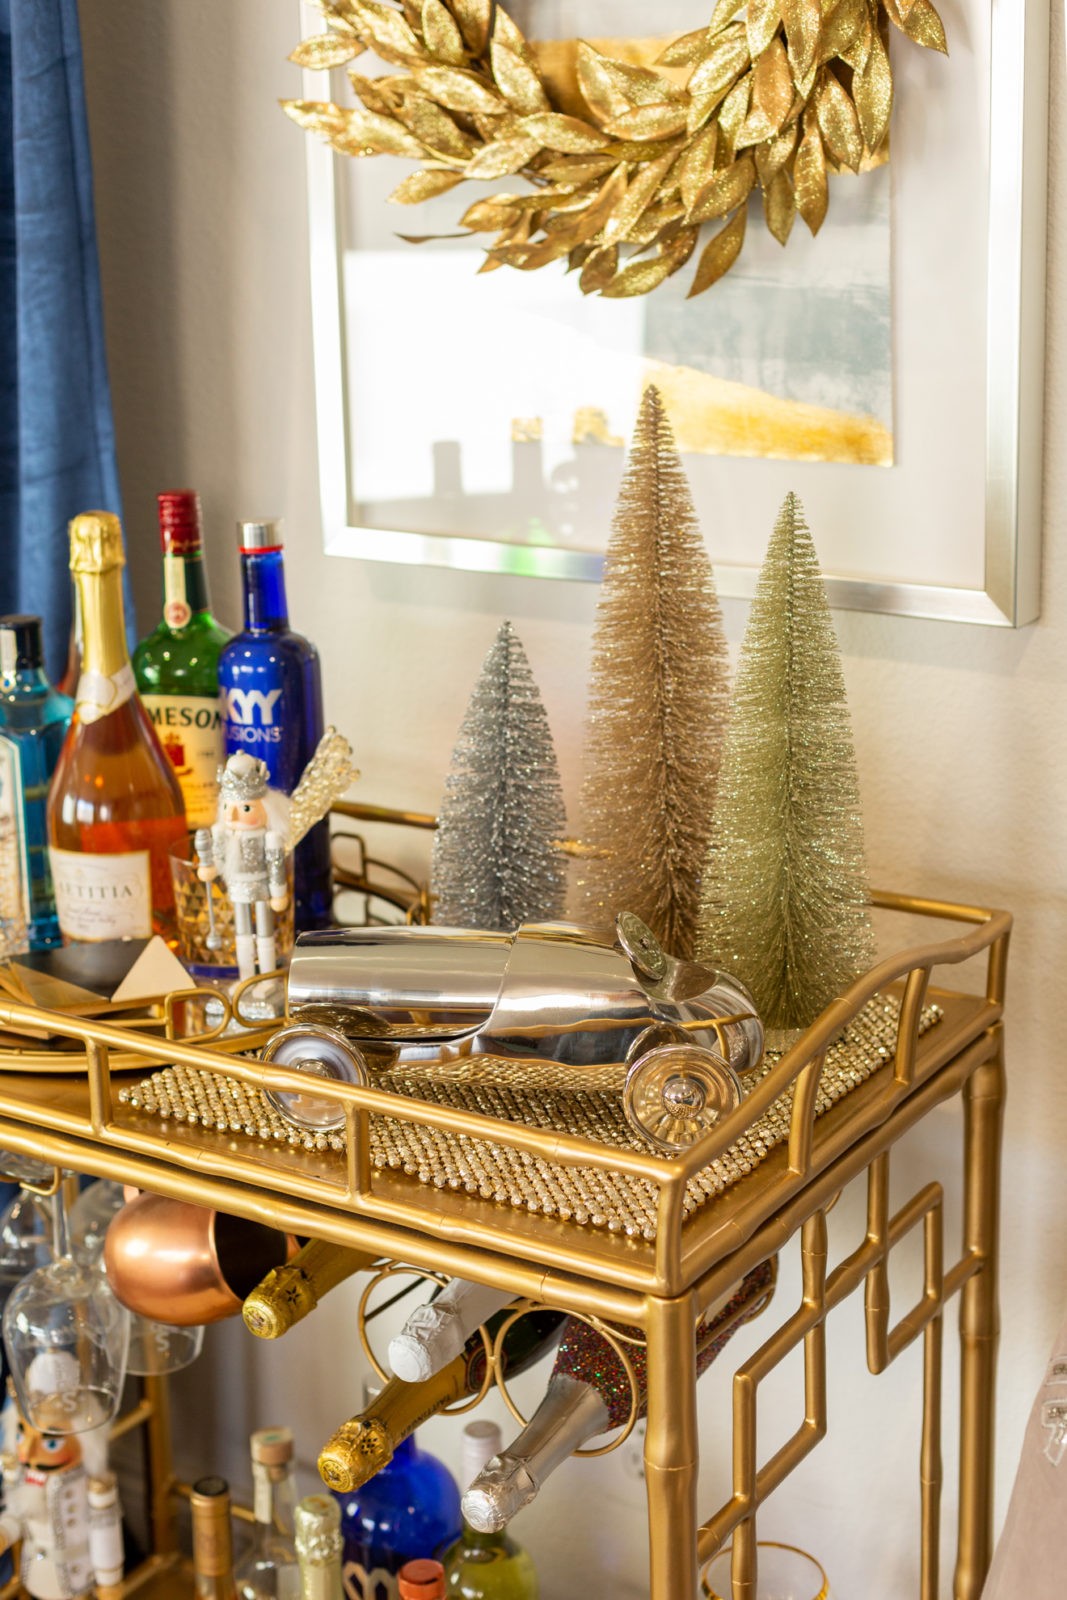 How to Decorate a Holiday Bar Cart in 5 Simple Steps by Home Decor Blogger Laura Lily | How to Decorate a Holiday Bar Cart in 5 Simple Steps by popular Los Angeles life and style blogger, Laura Lily: image of a gold bar cart with various alcoholic drinks, glasses, and holiday decor.